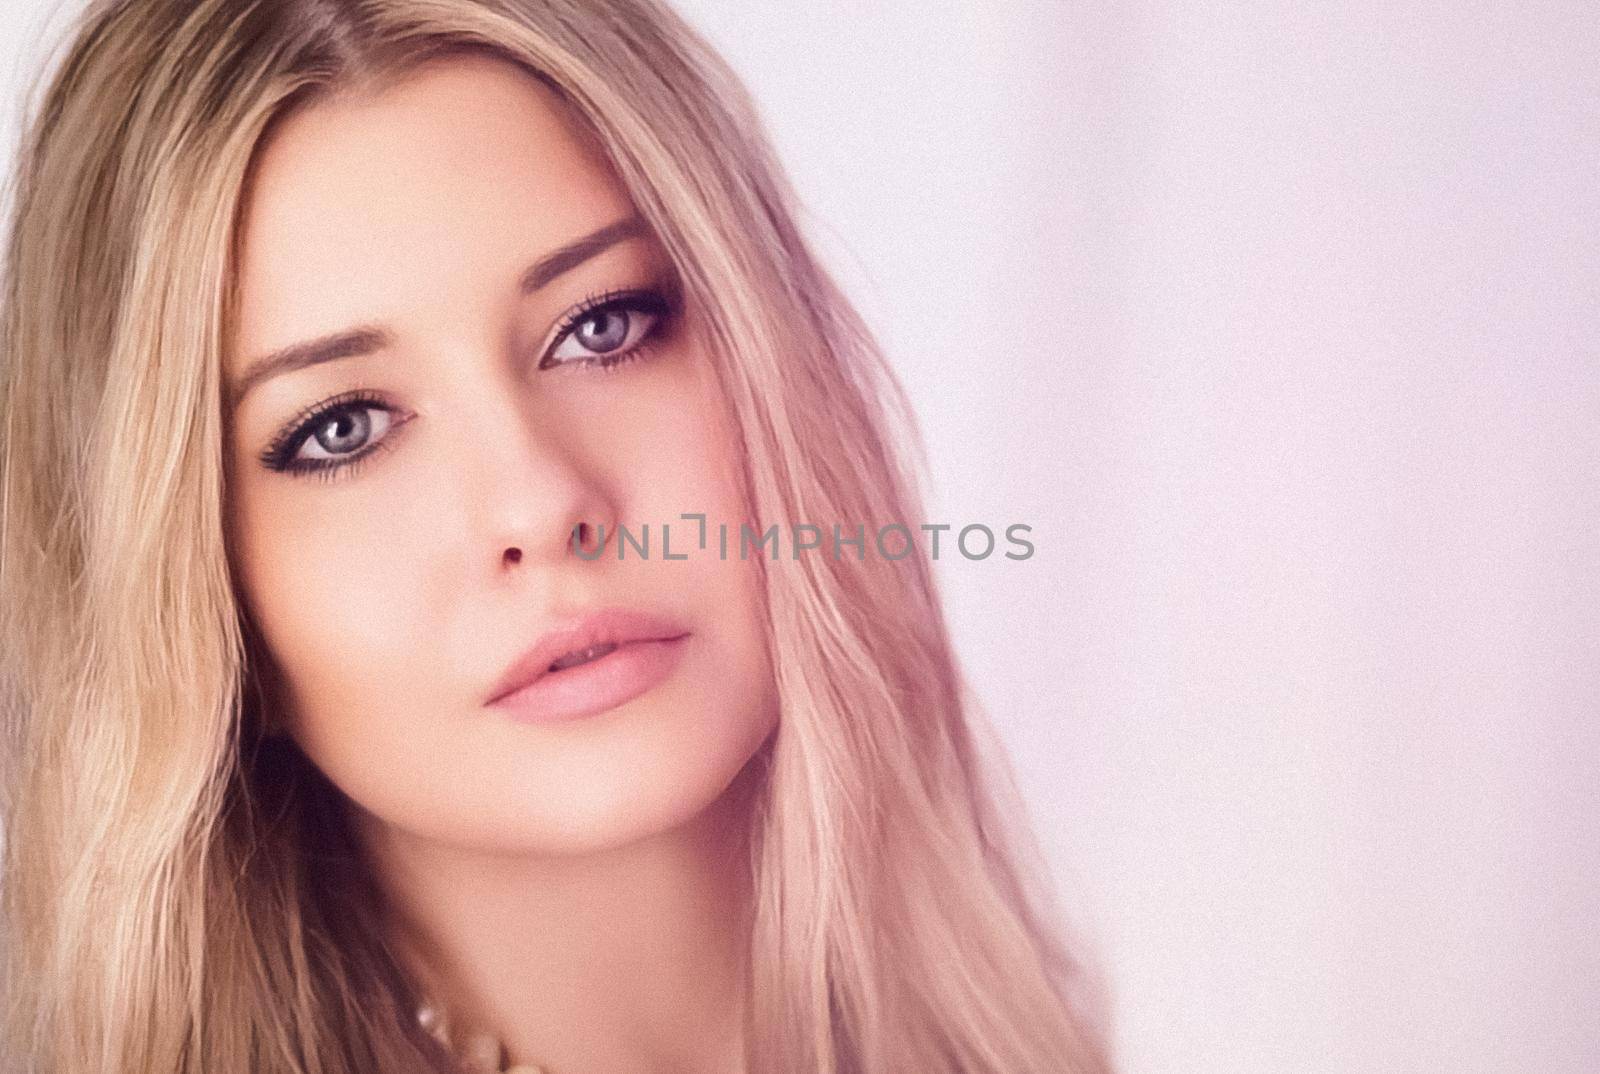 Beauty, makeup and glamour look. Beautiful blonde woman with long hairstyle and smokey eyes evening make-up, closeup fashion portrait with retro film grain effect.